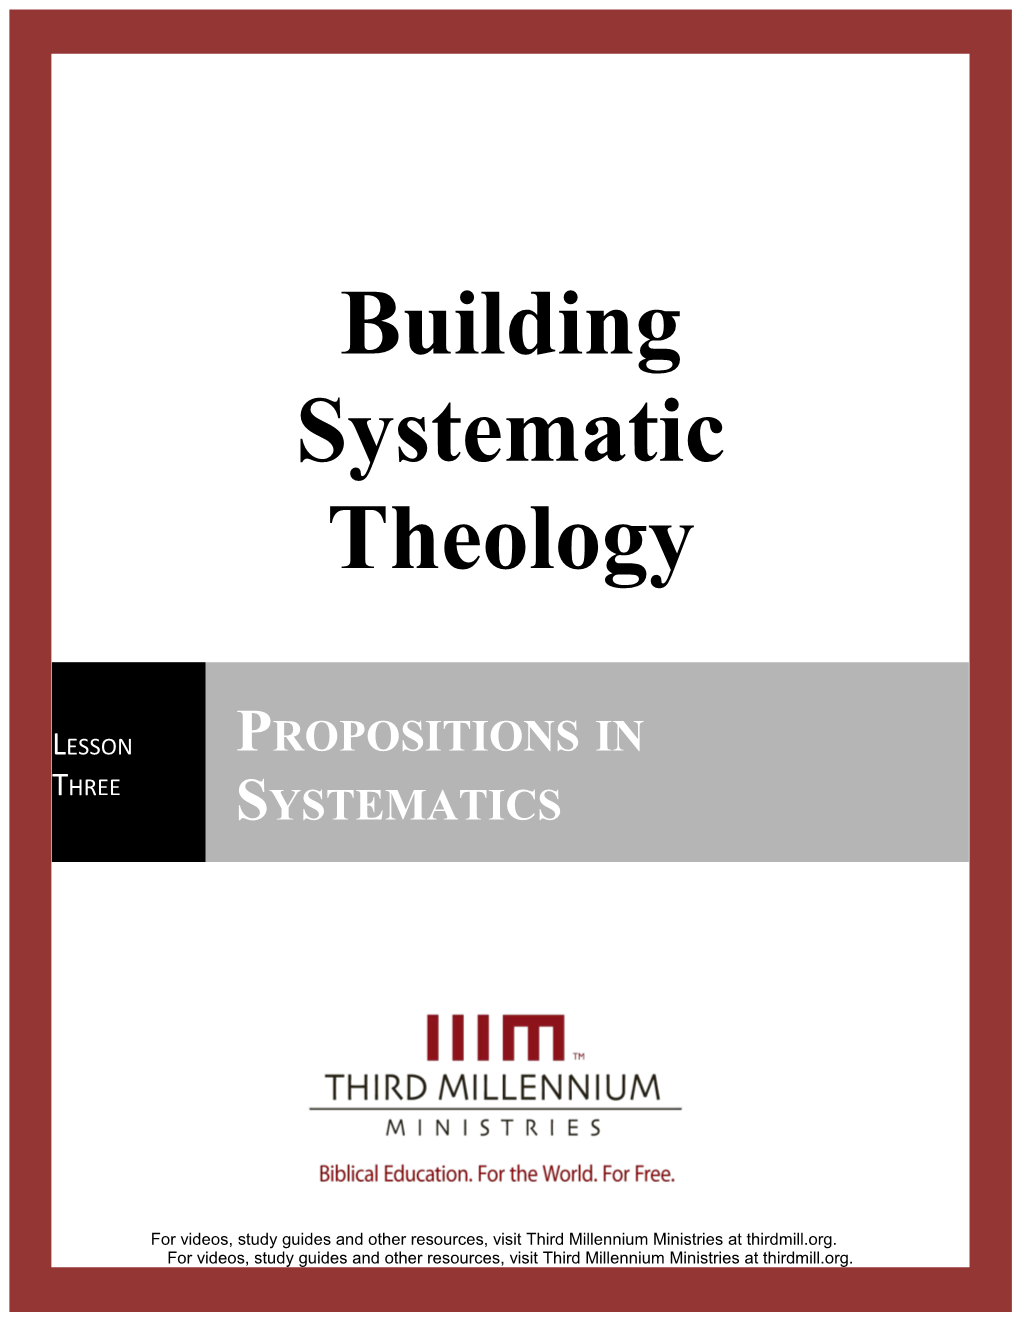 Building Systematic Theology, Lesson 3